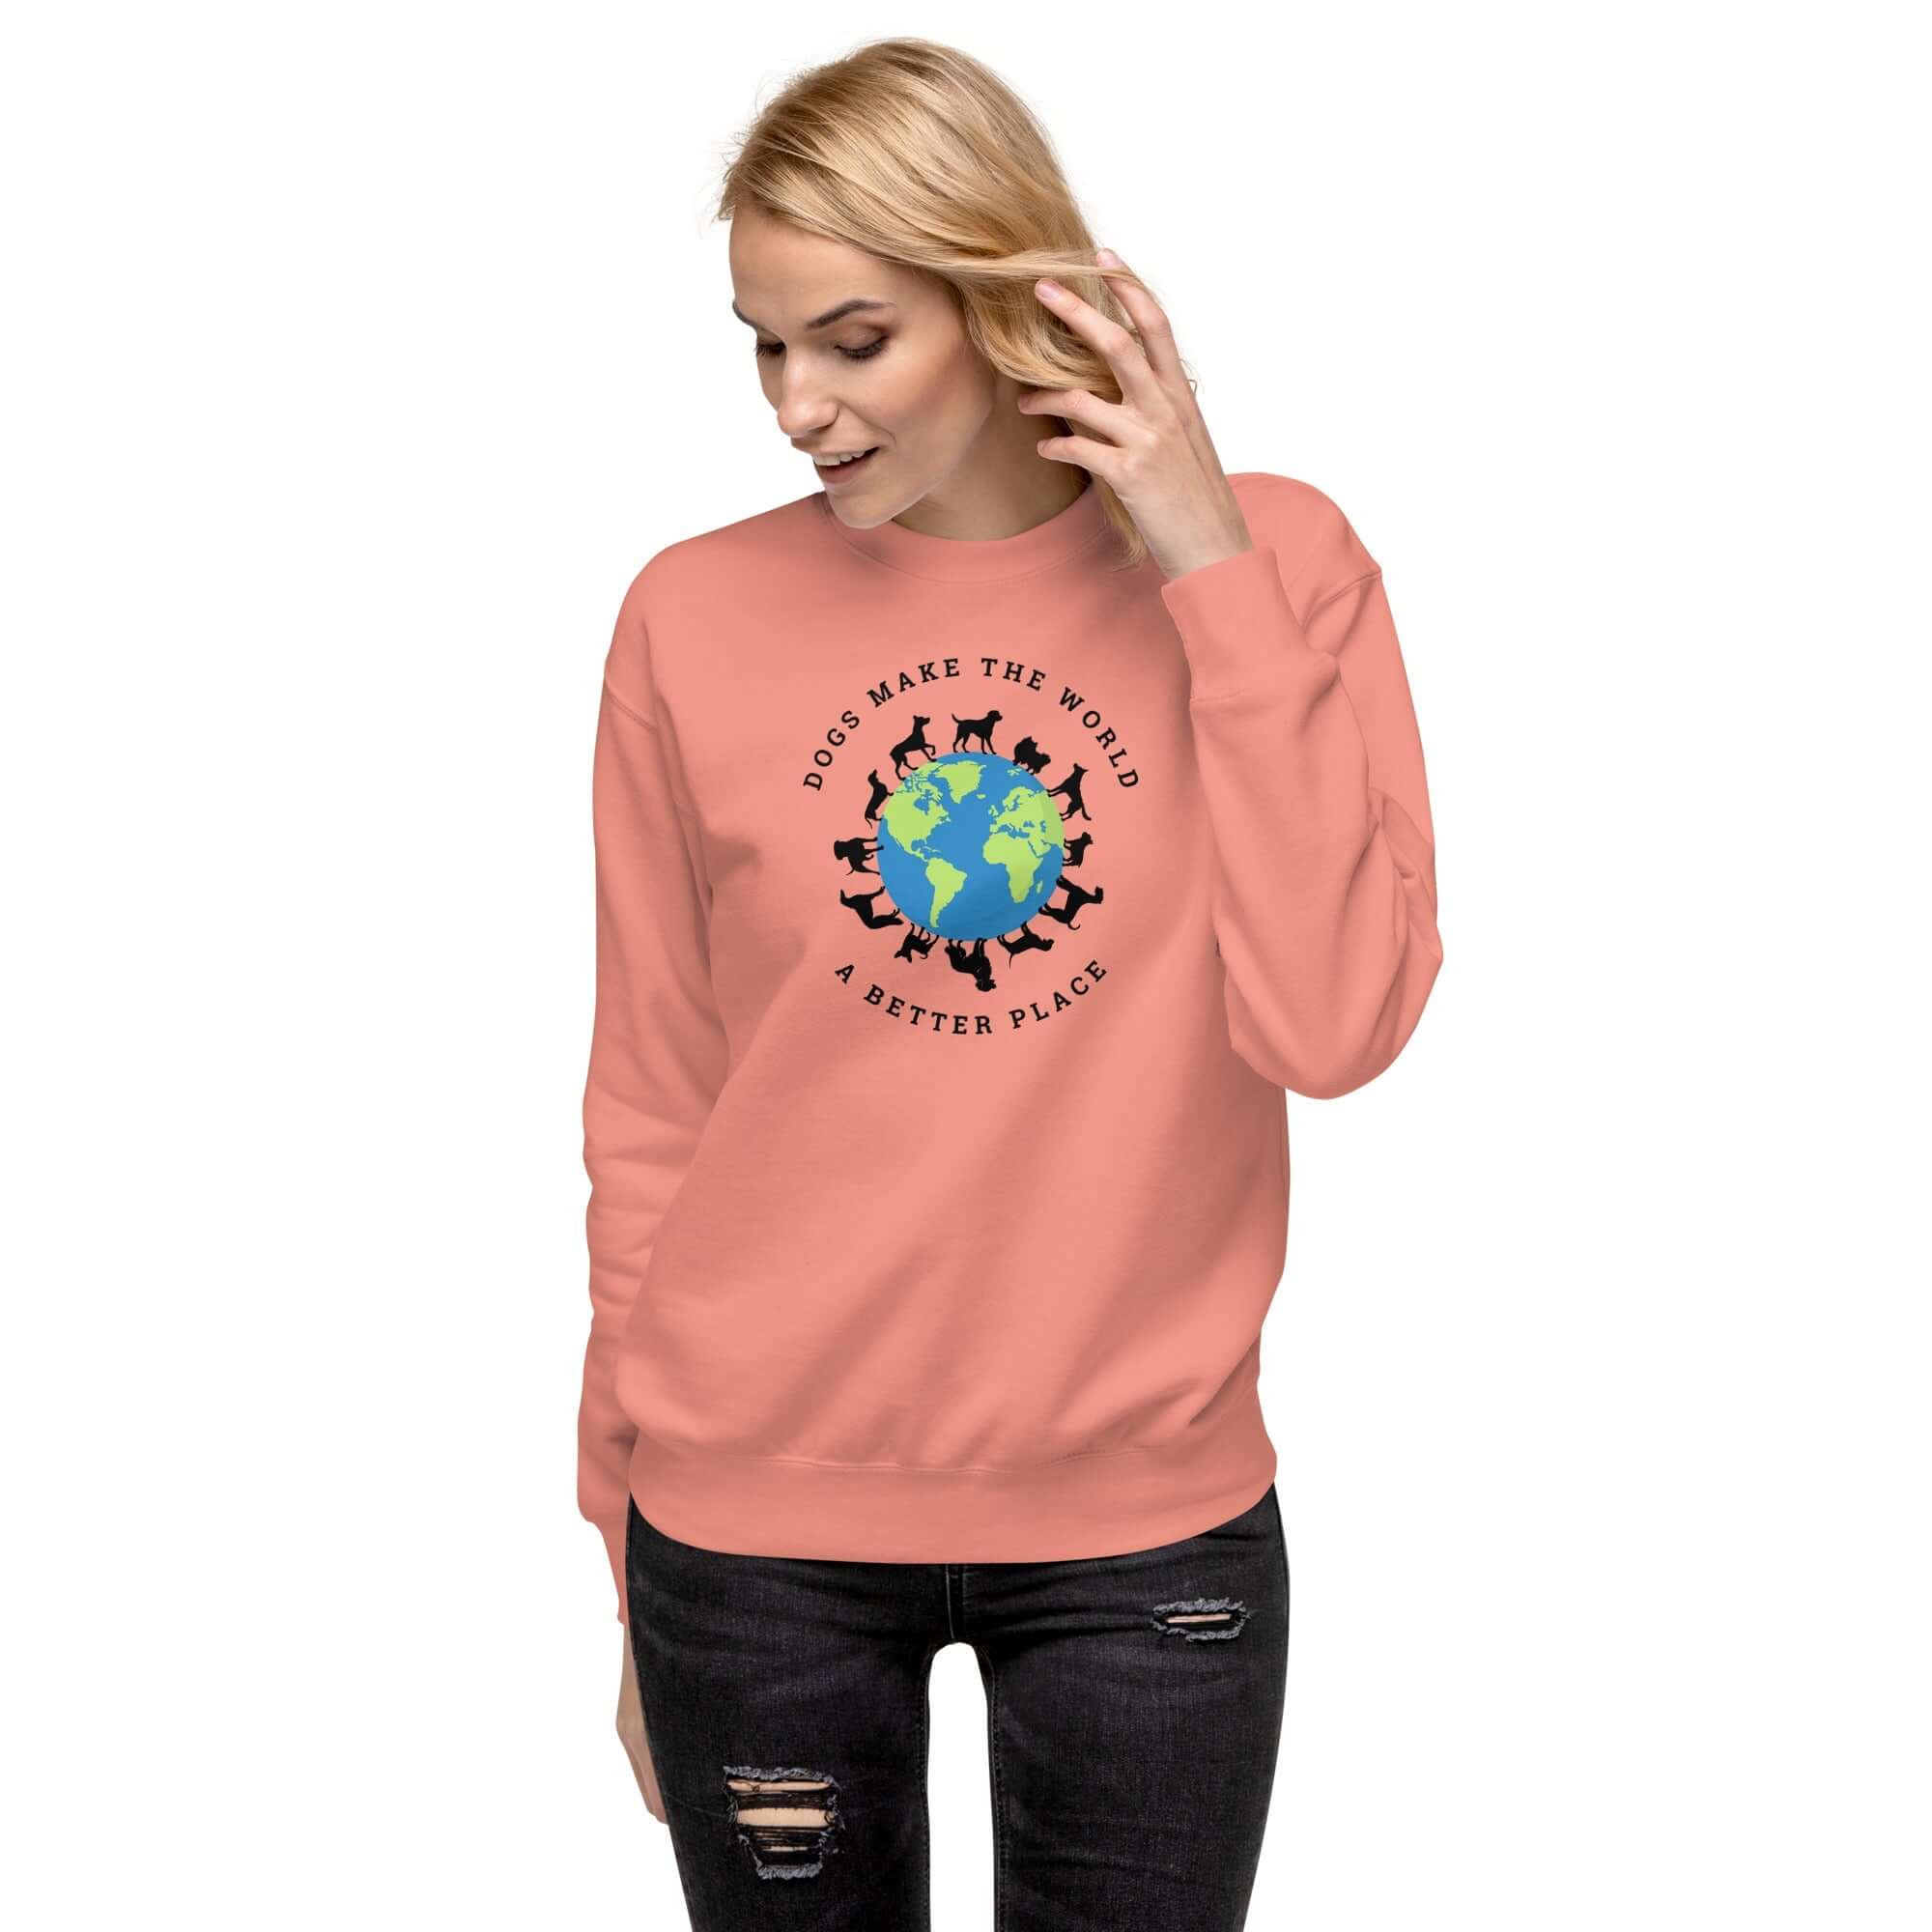 Better Place Crewneck Sweatshirt - TAILWAGS UNLIMITED